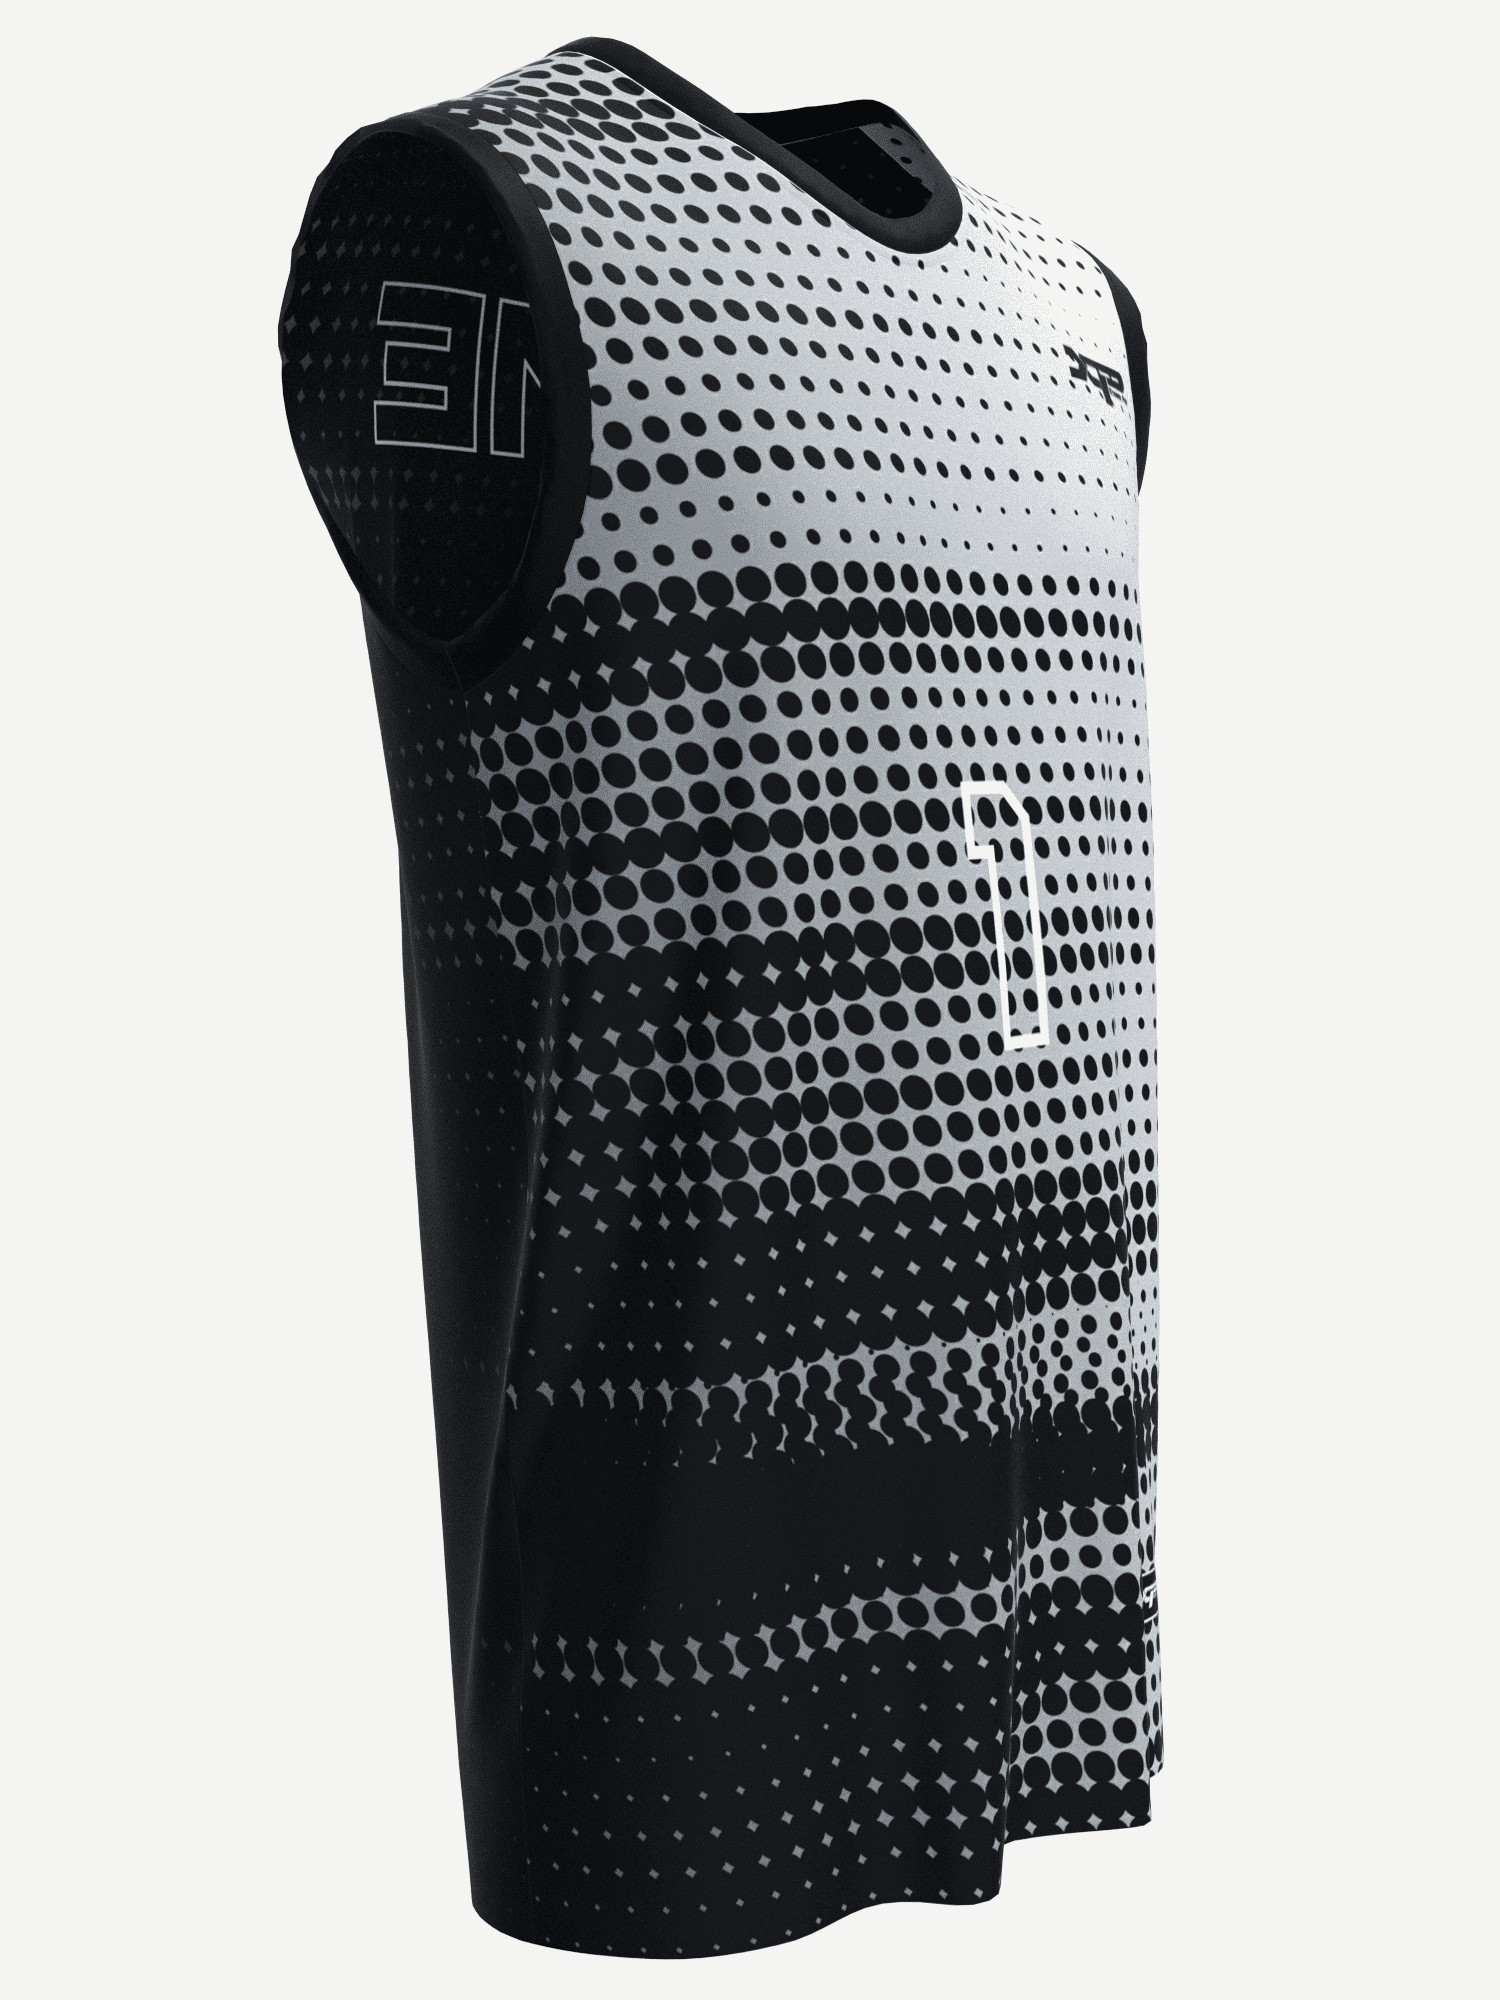 Halftone Speed Jersey in black and white Xtreme Pro Apparel